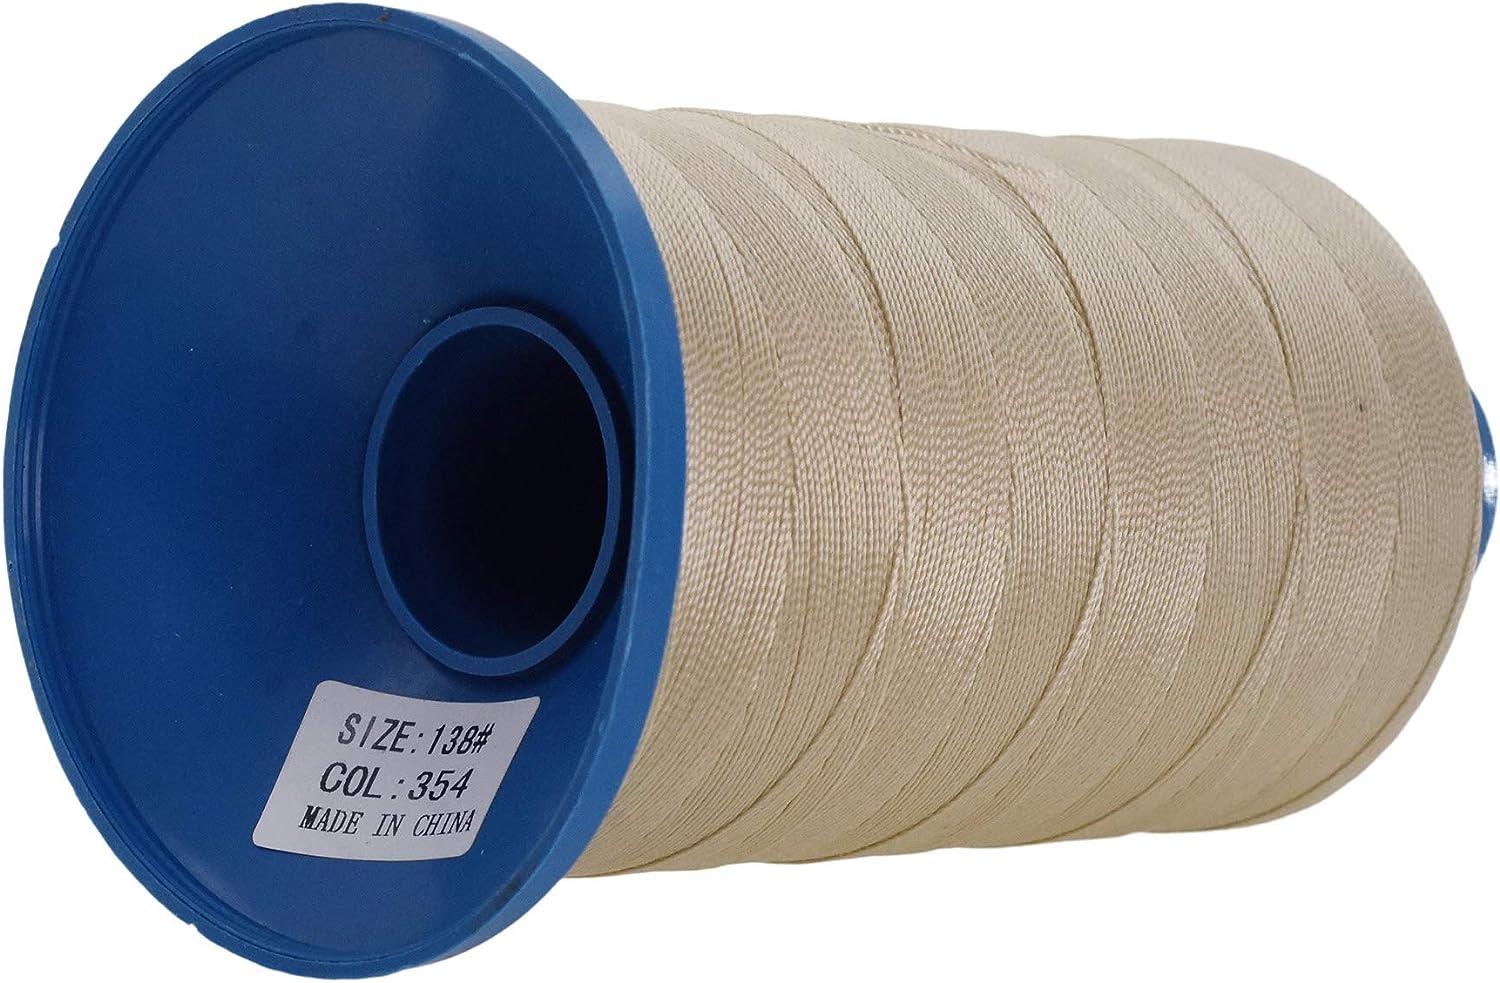 100% Nylon Bonded Sewing Thread for Leather Goods - China Bonded